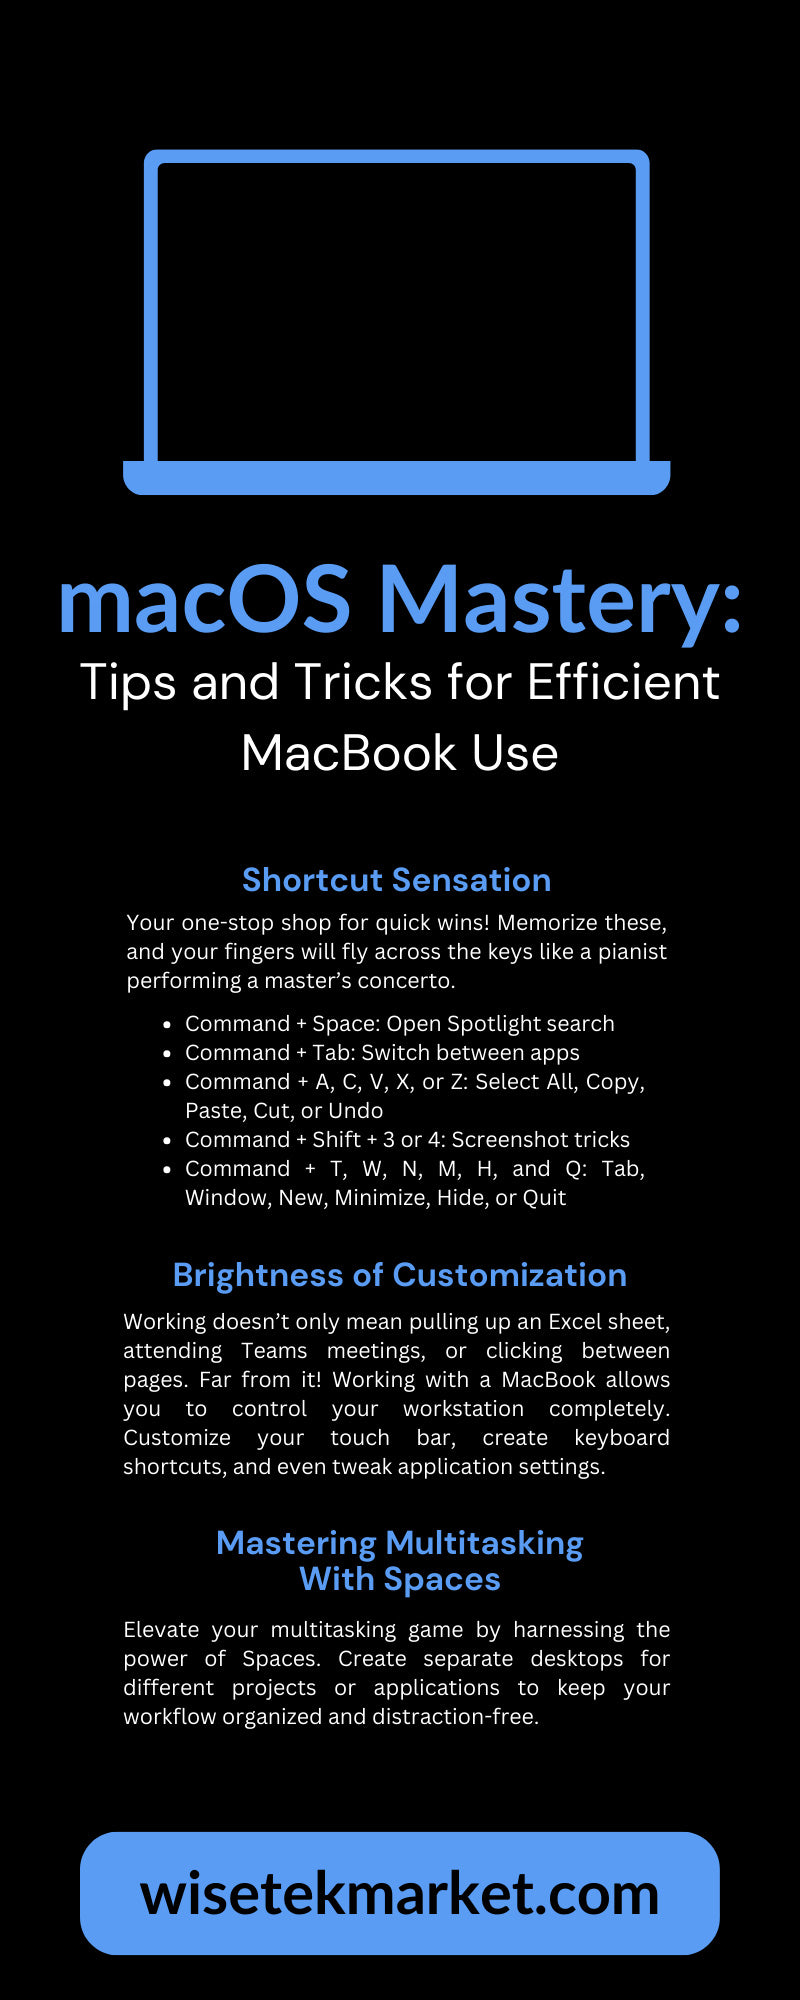 macOS Mastery: Tips and Tricks for Efficient MacBook Use